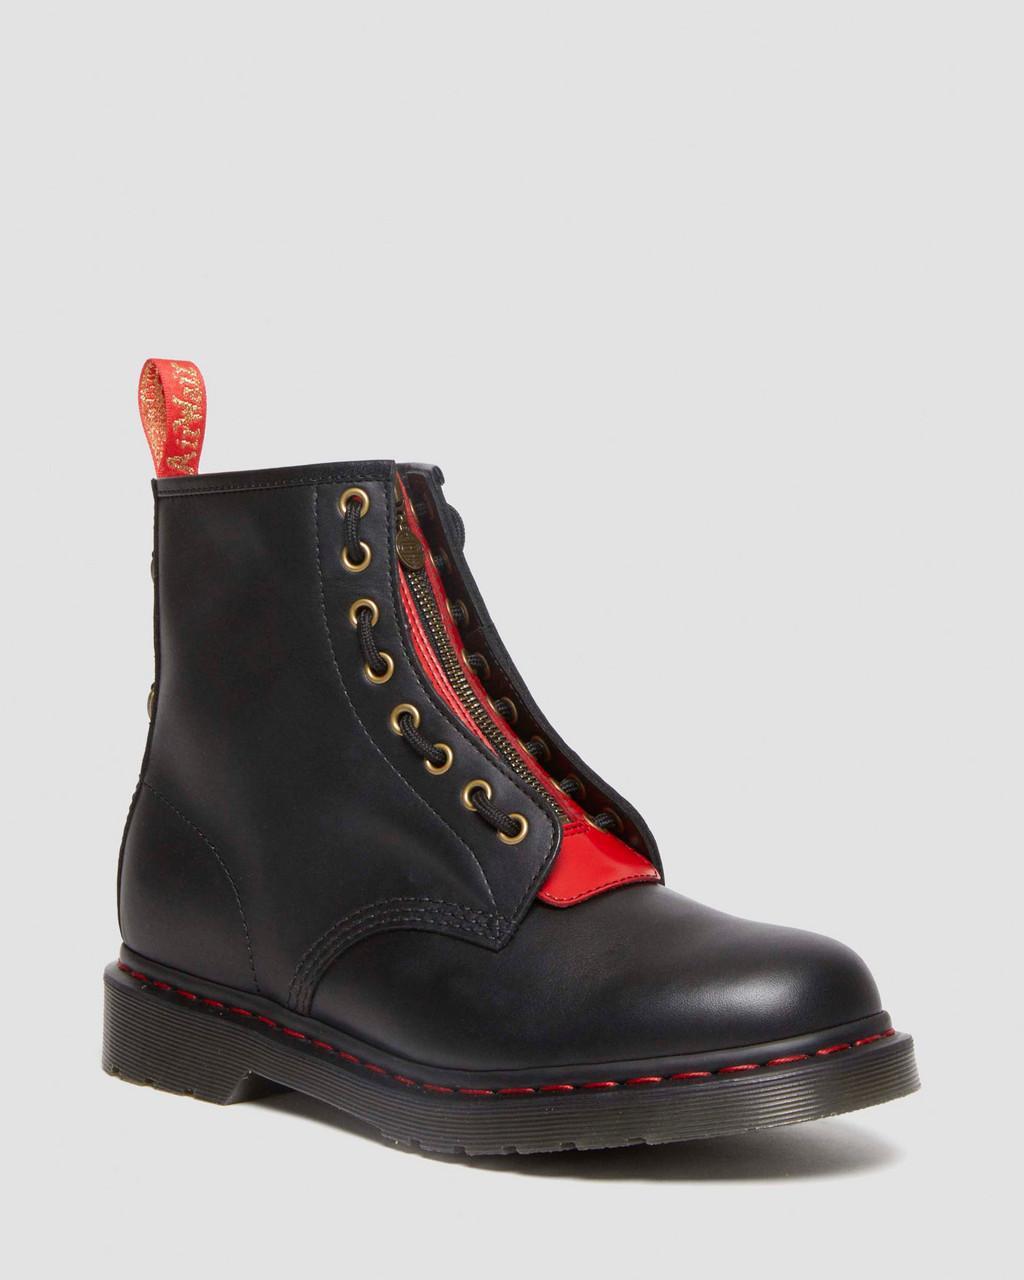 Dr. Martens 1460 Year Of The Rabbit Leather Lace Up Boots in Black | Lyst